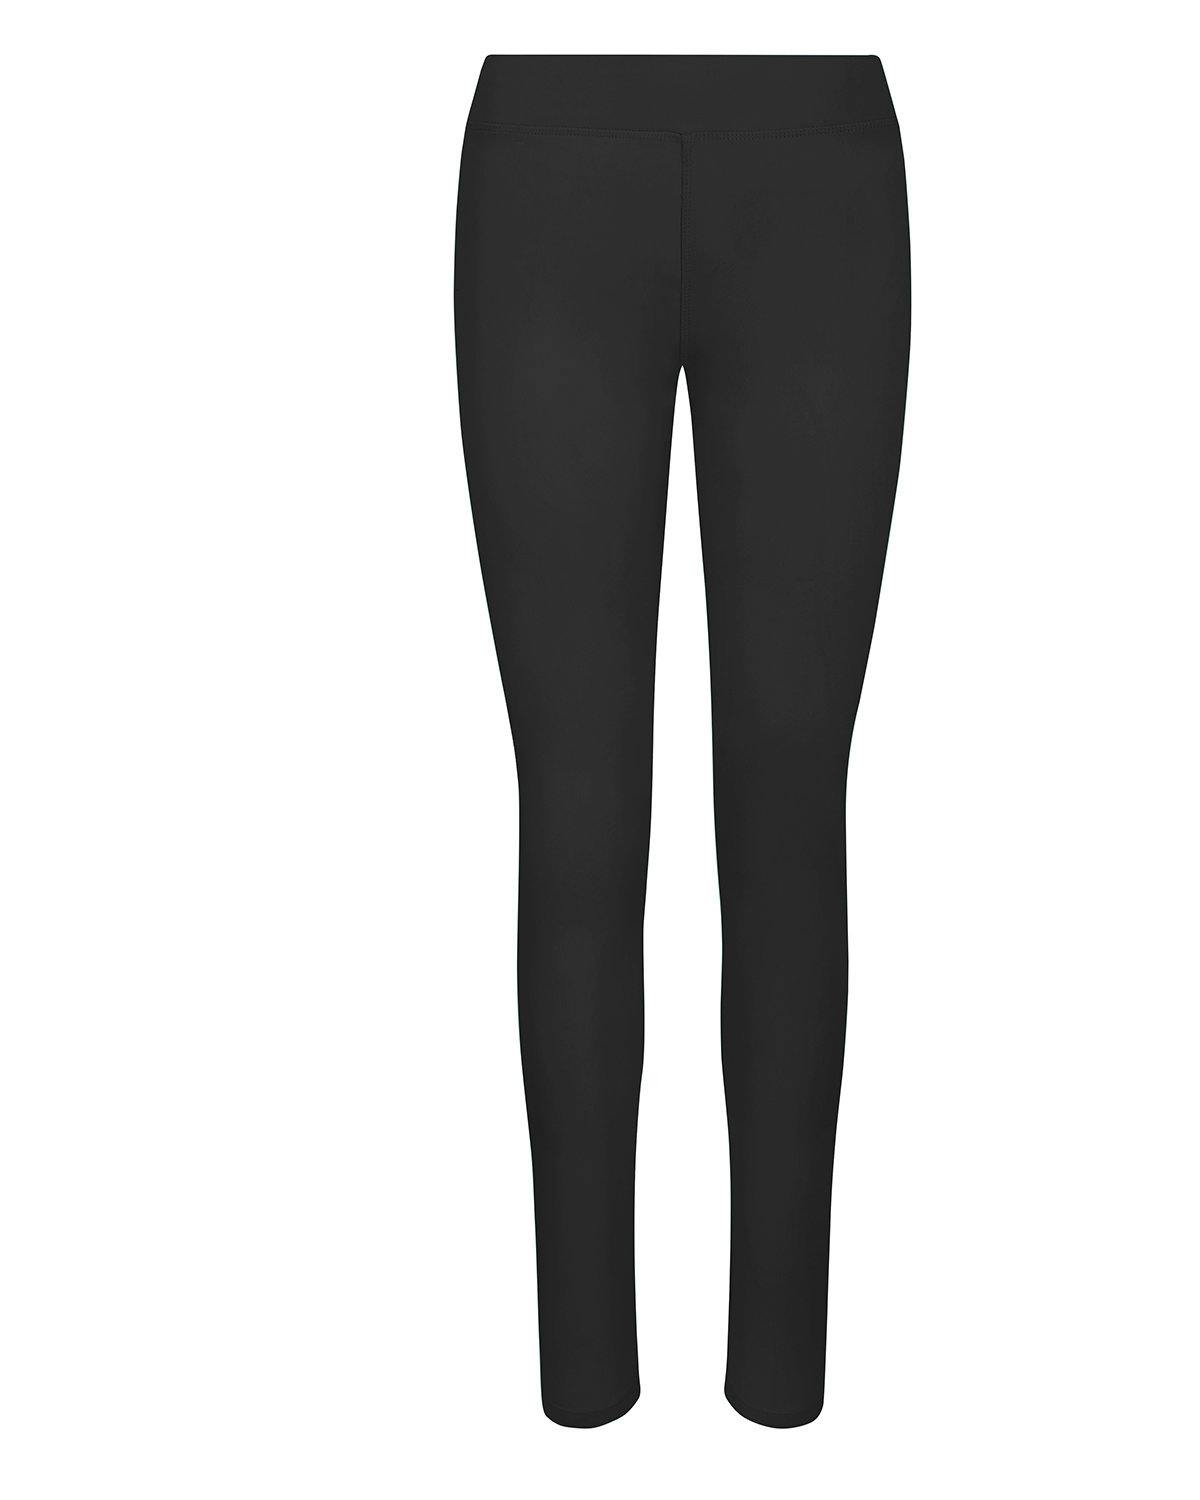 Image for Ladies' Cool Workout Leggings